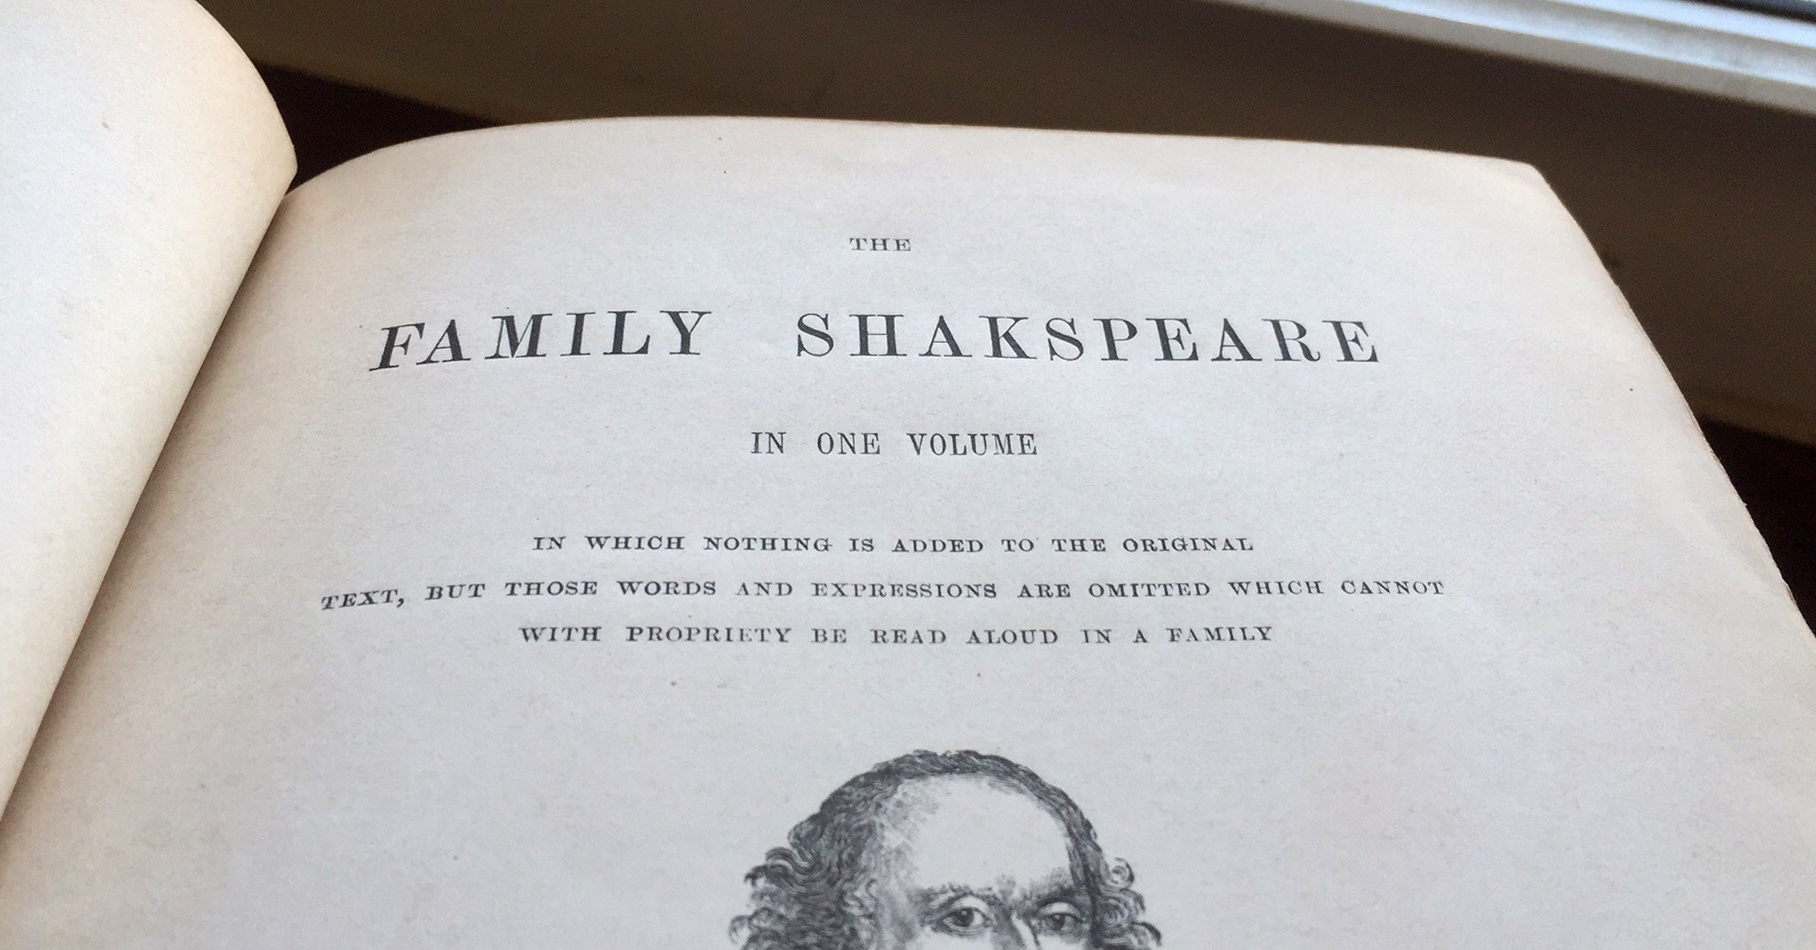 Title page from Thomas Bowdler's Family Shakespeare, 1863 edition, including etching portrait of Shakespeare